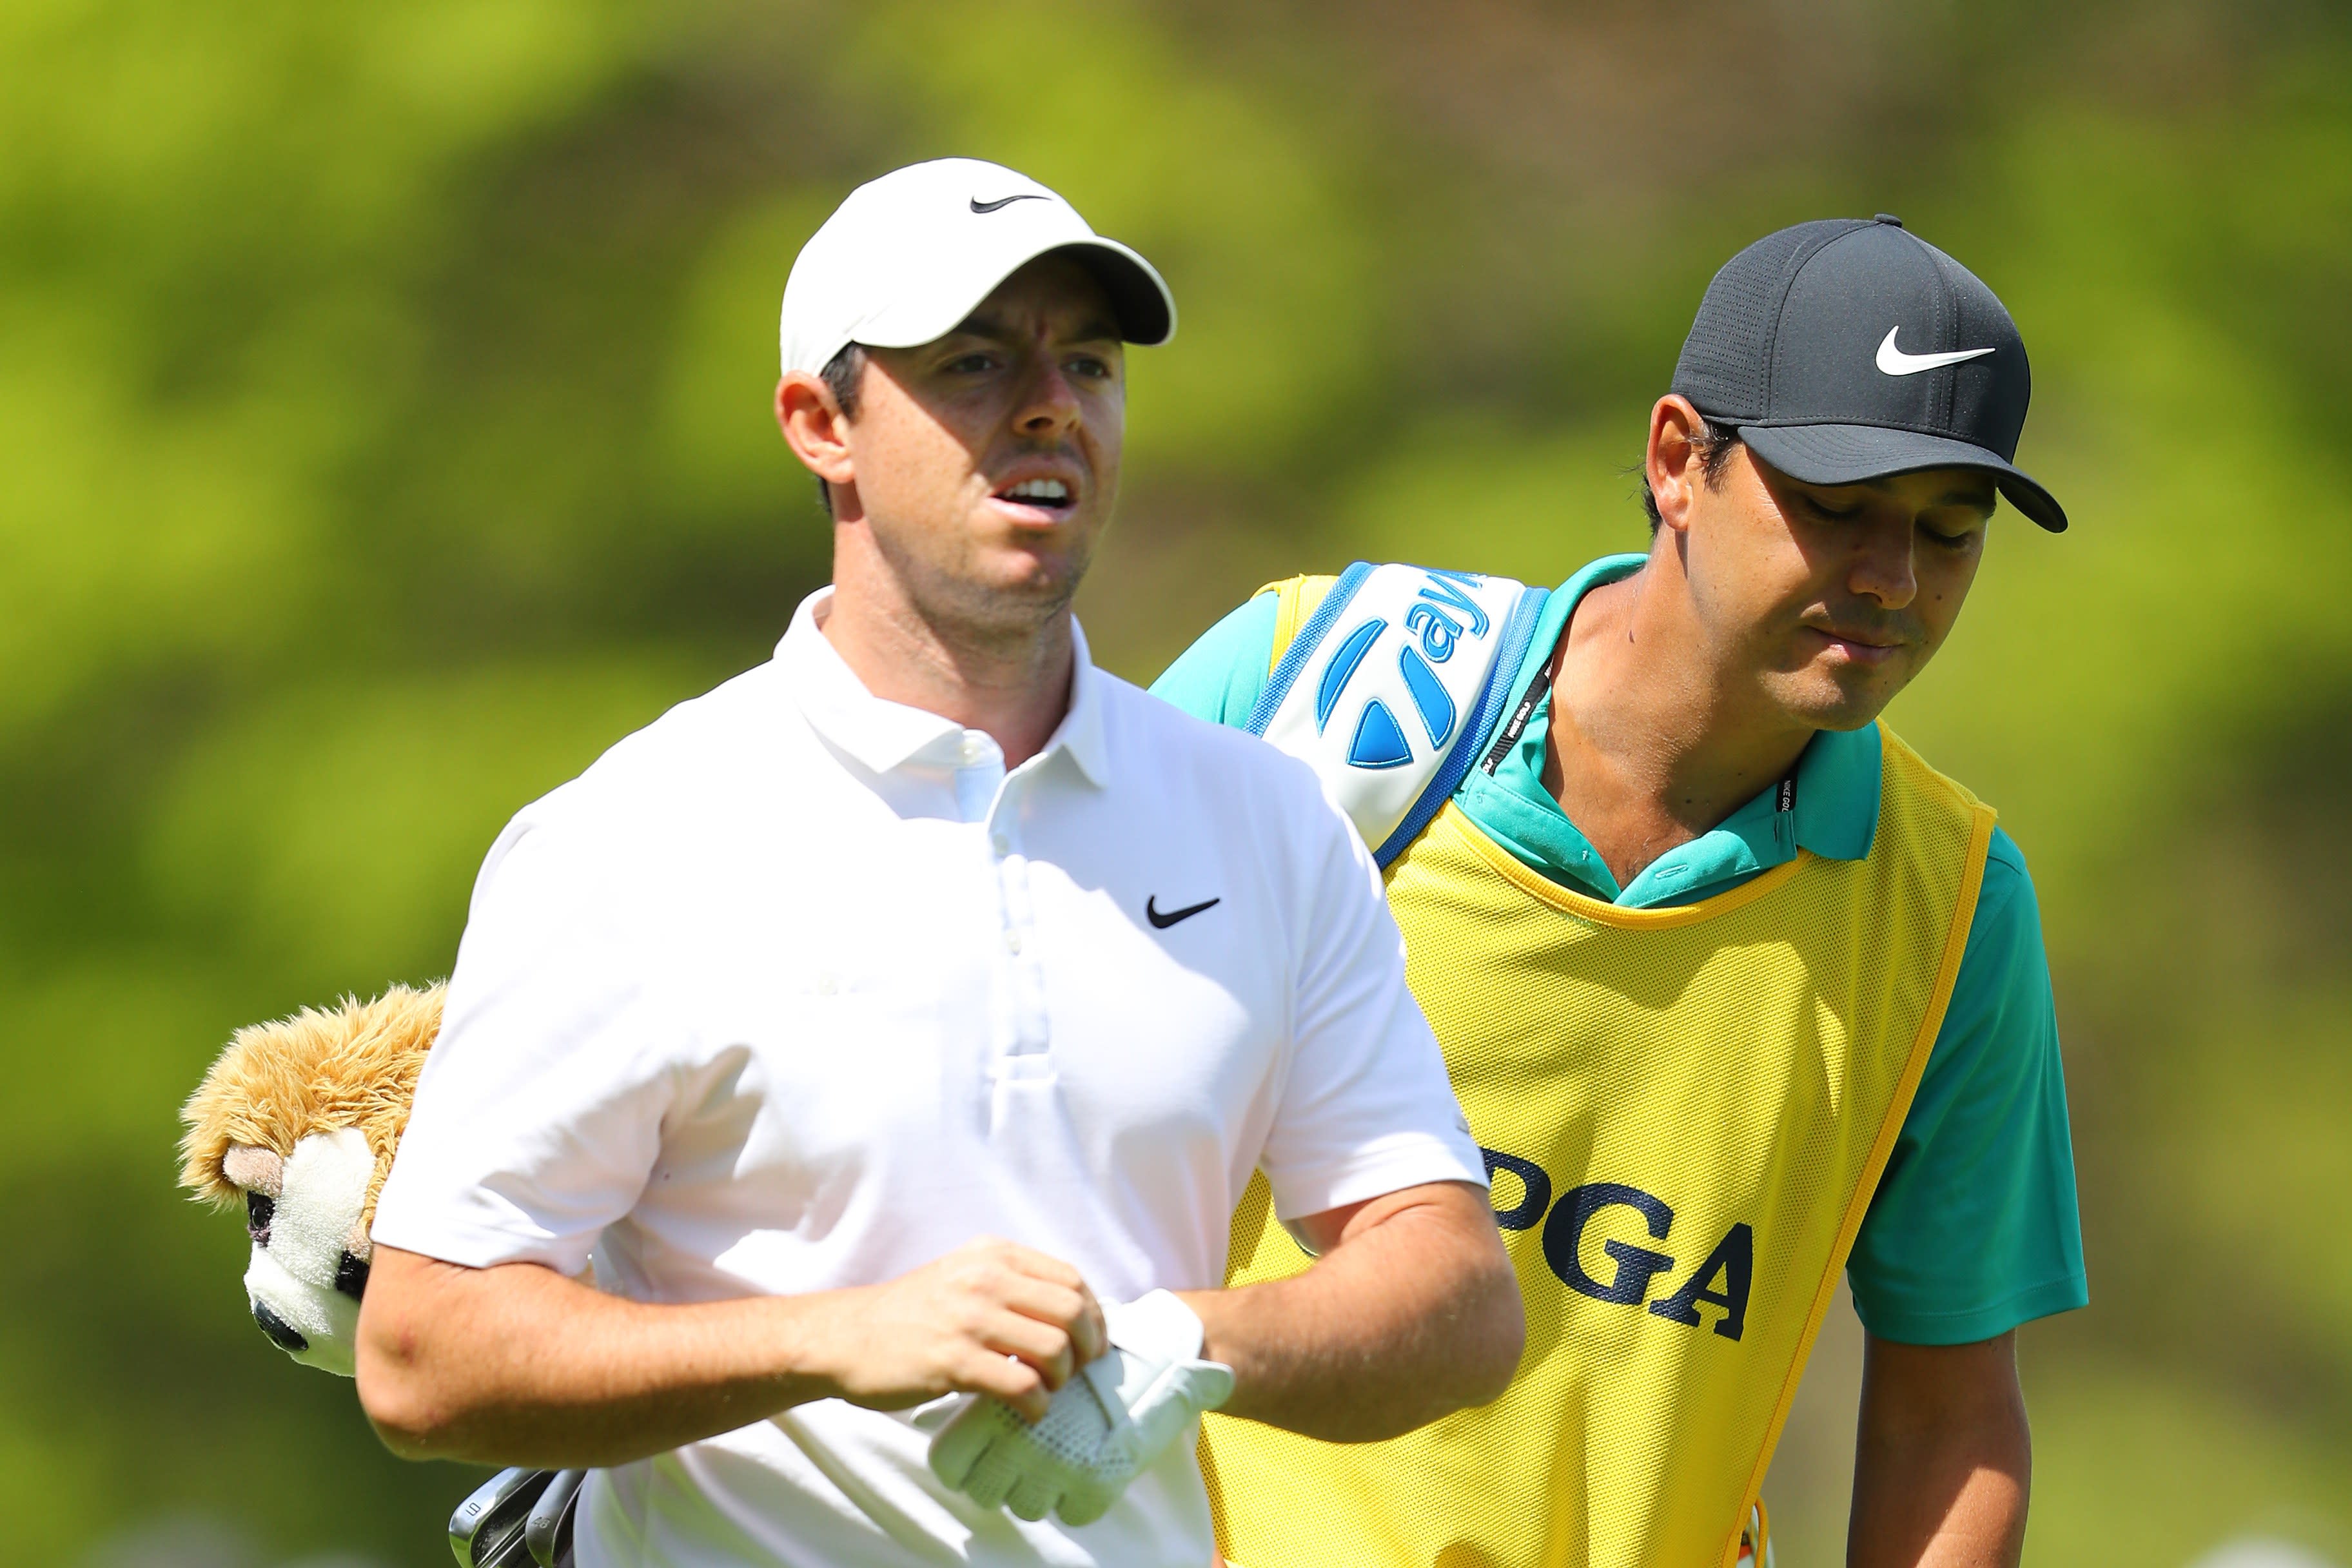 PGA Championship 2019 Rory McIlroy had the perfect answer for what the